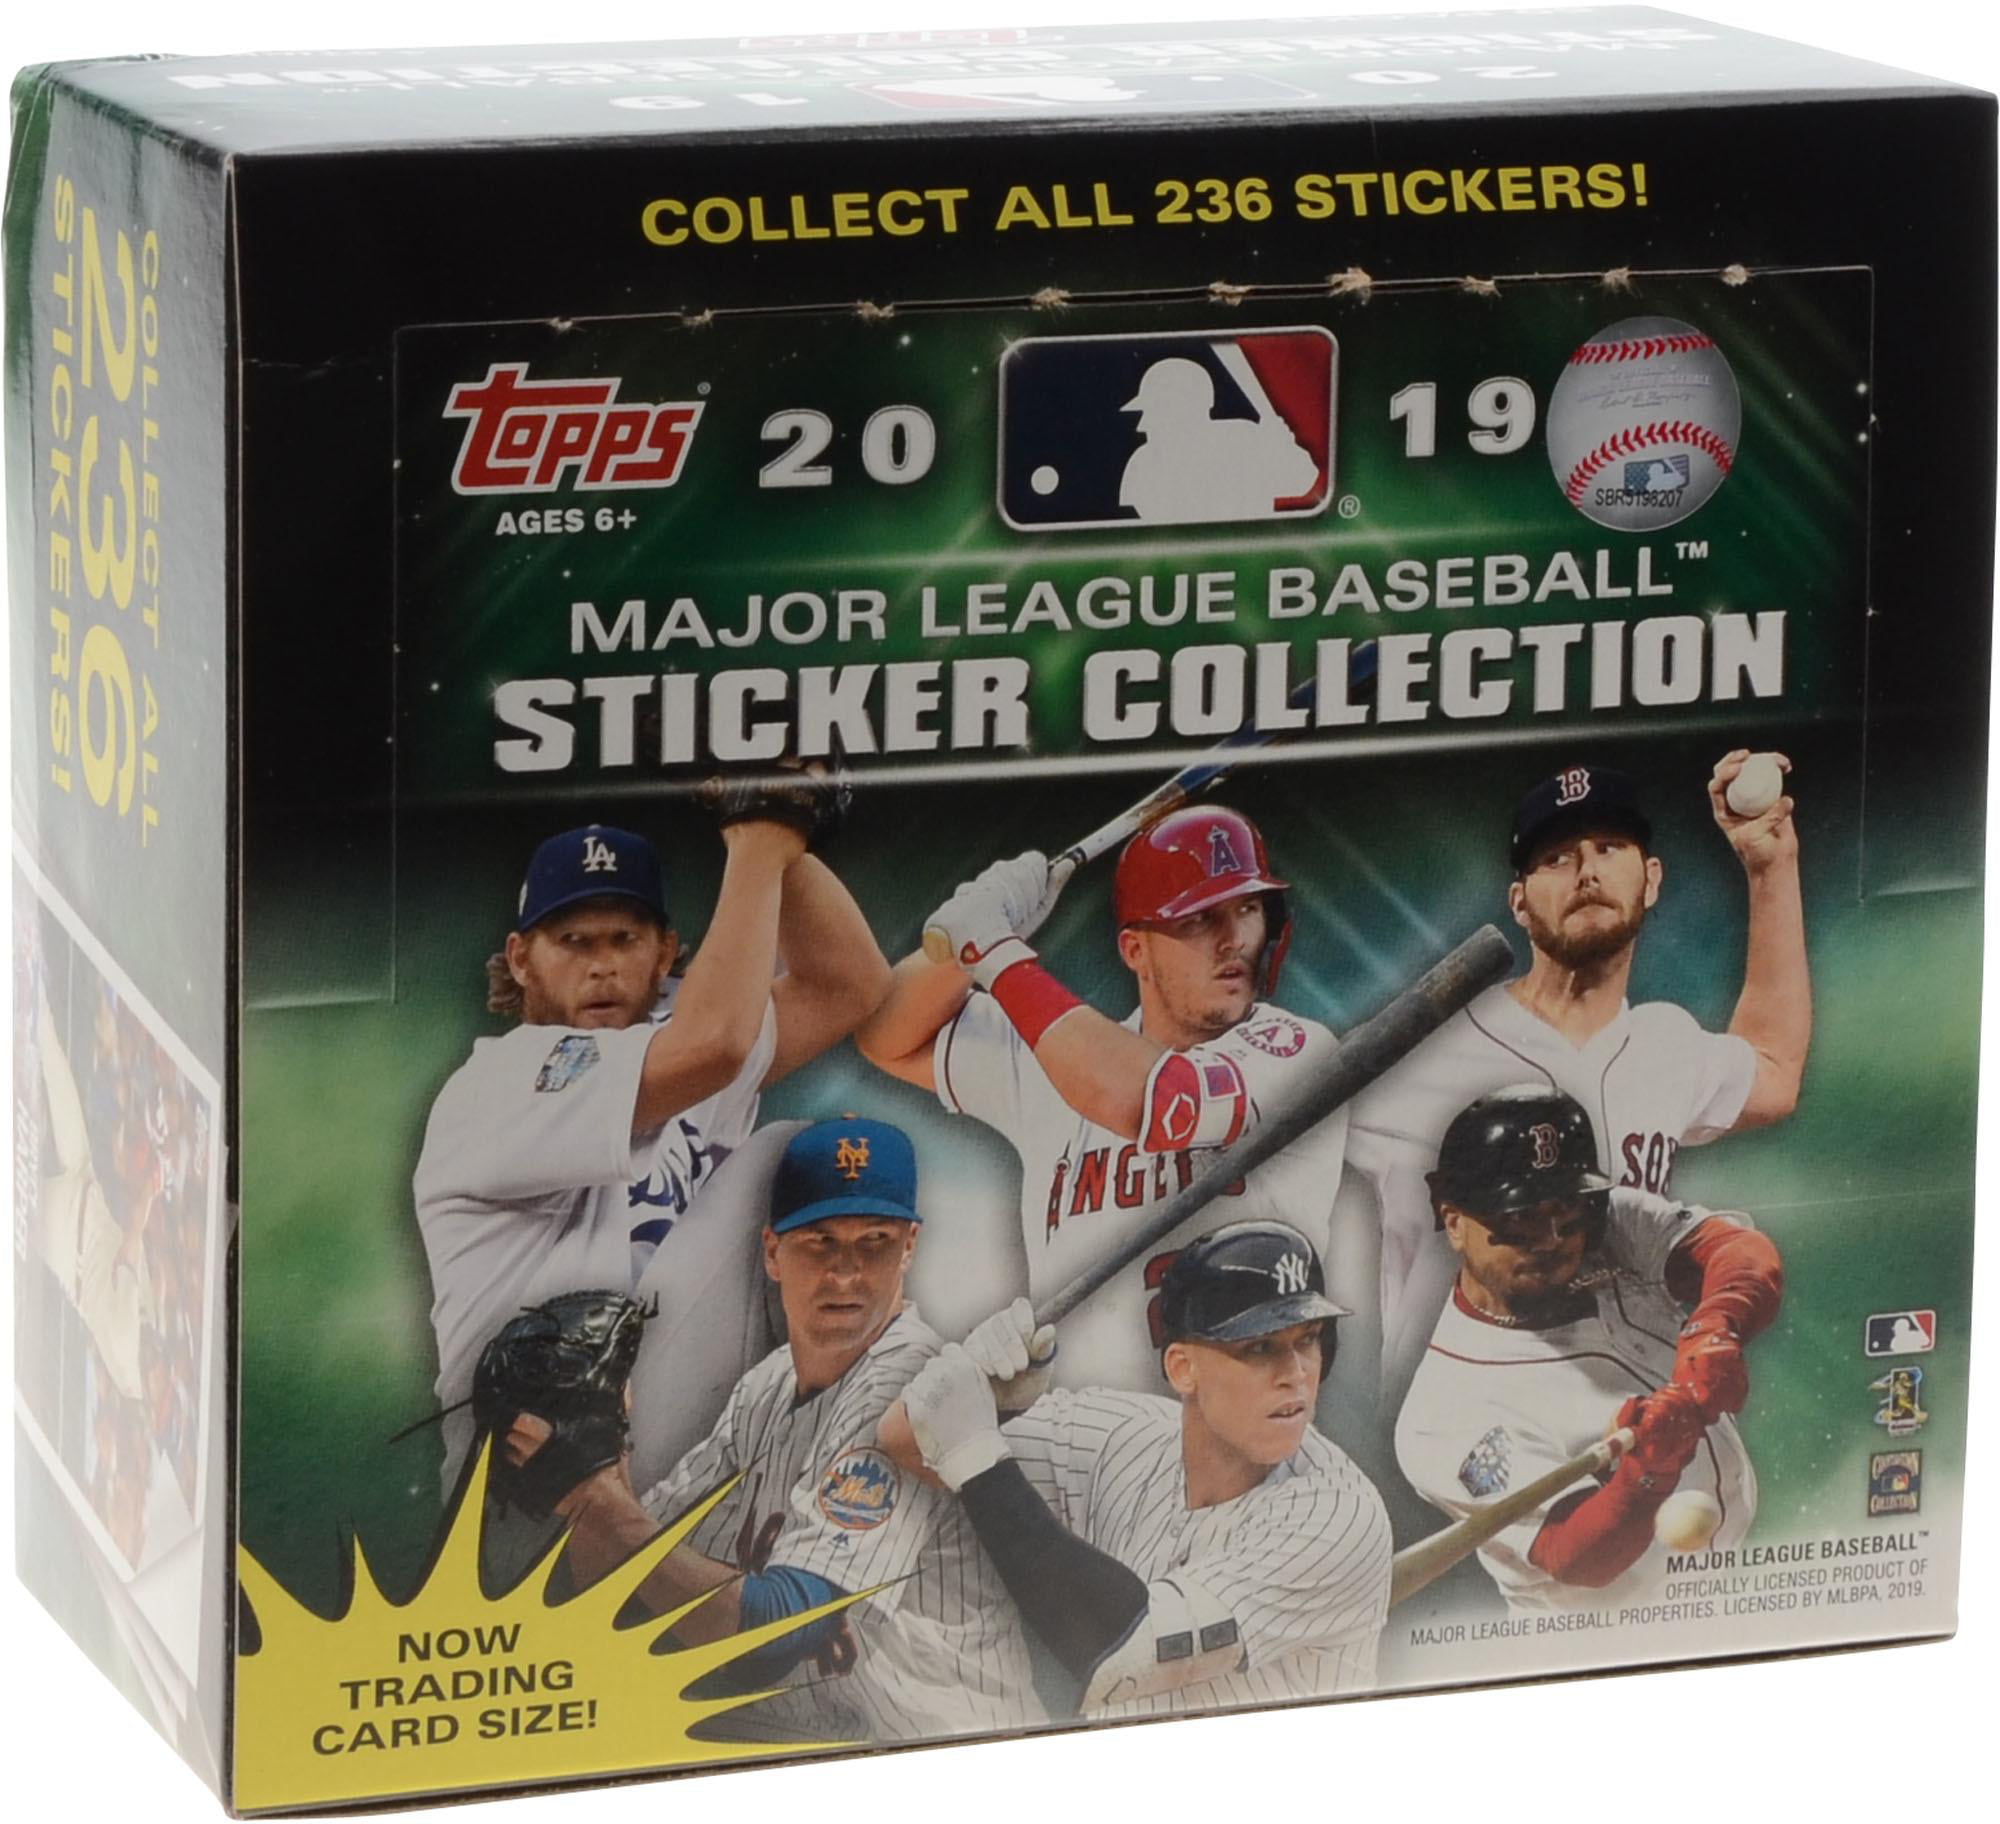 Fanatics Authentic Certified 2019 Topps Sticker Collection Baseball Factory Sealed 50 Pack Hobby Box